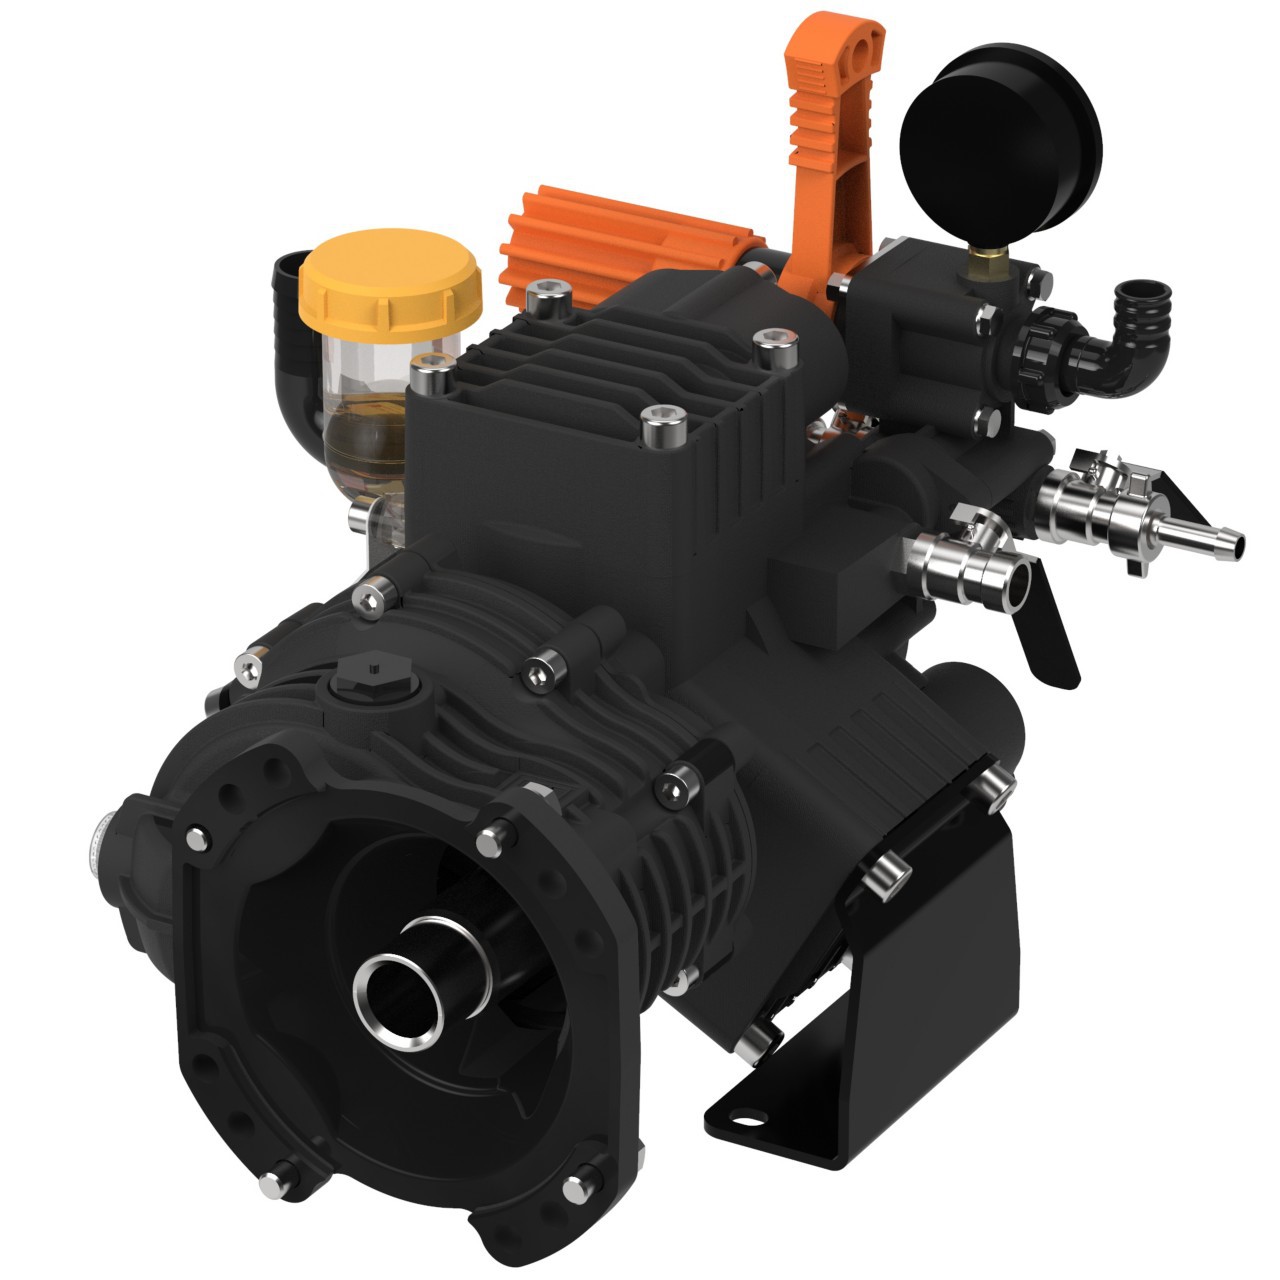 Picture of Diaphragm Pump, Medium Pressure, Poly Body, with Gearbox & Pressure Control, 13.5 GPM, 580 PSI, 3450 RPM, 1" Hollow Shaft, 1-3/8" Inlet, 3/4" Outlet, 5.5 HP